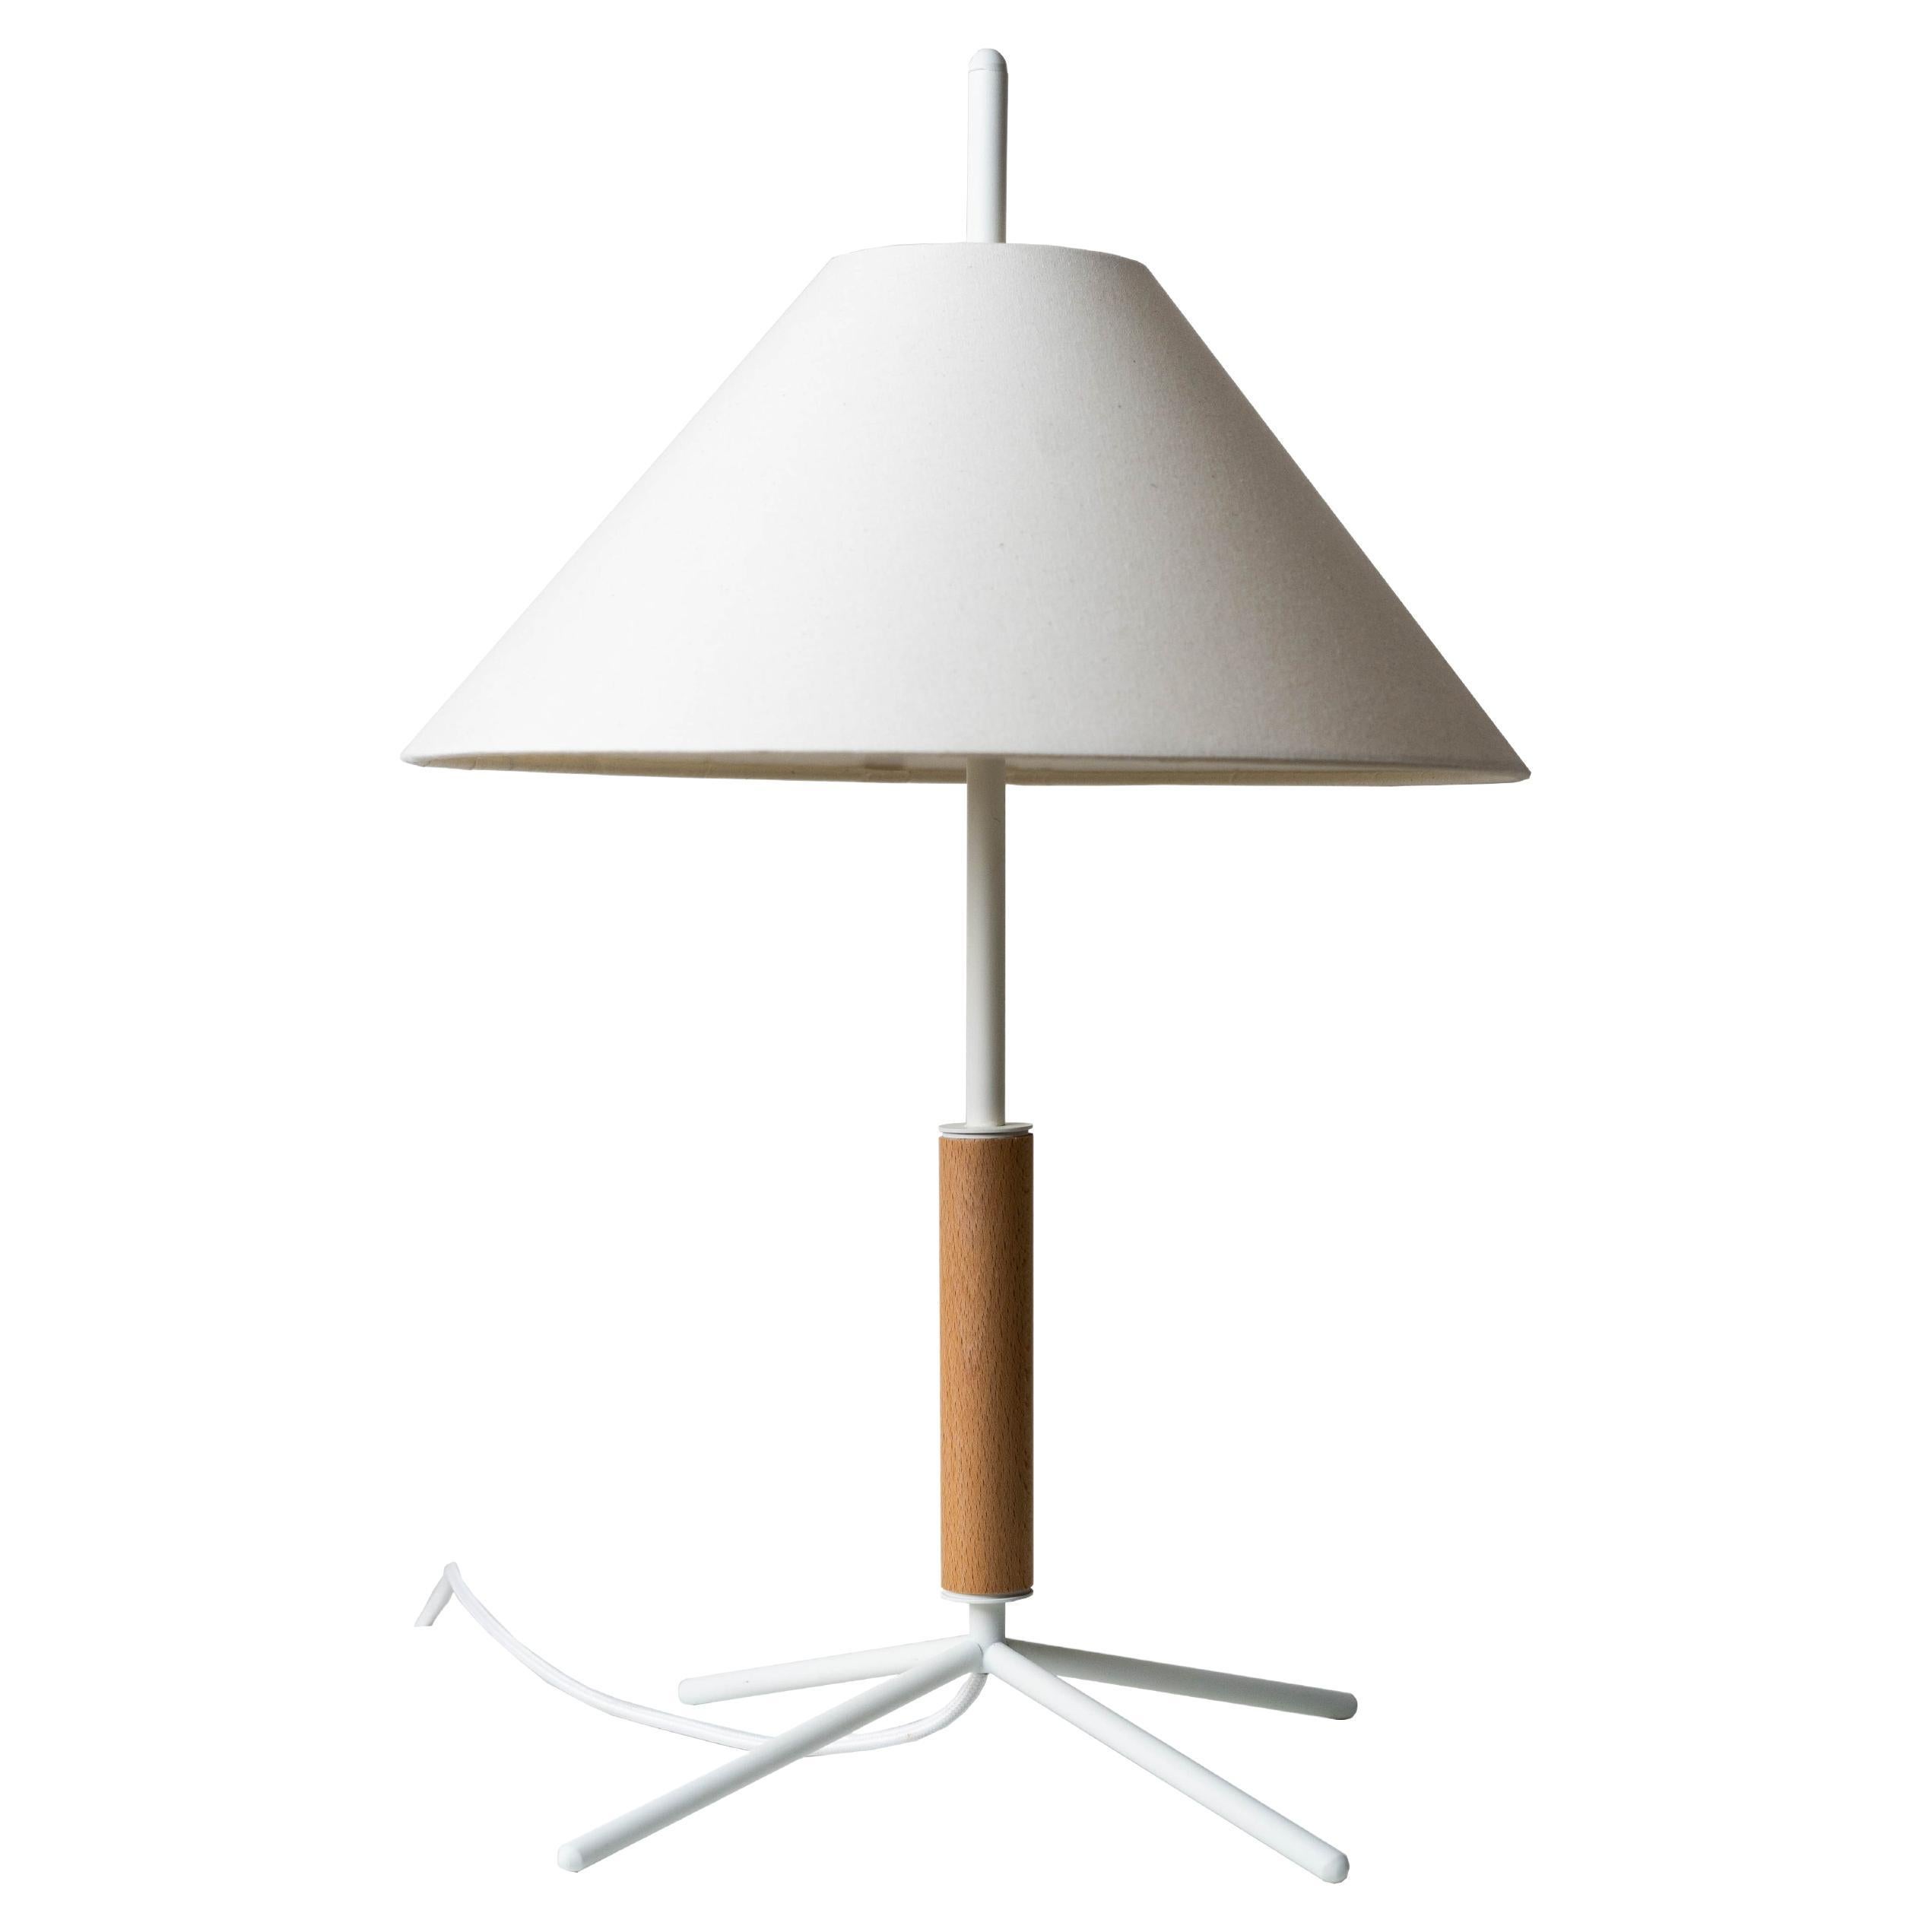 Contemporary, Handmade Table Lamp, White, Fabric, Wood, by Mediterranean Objects